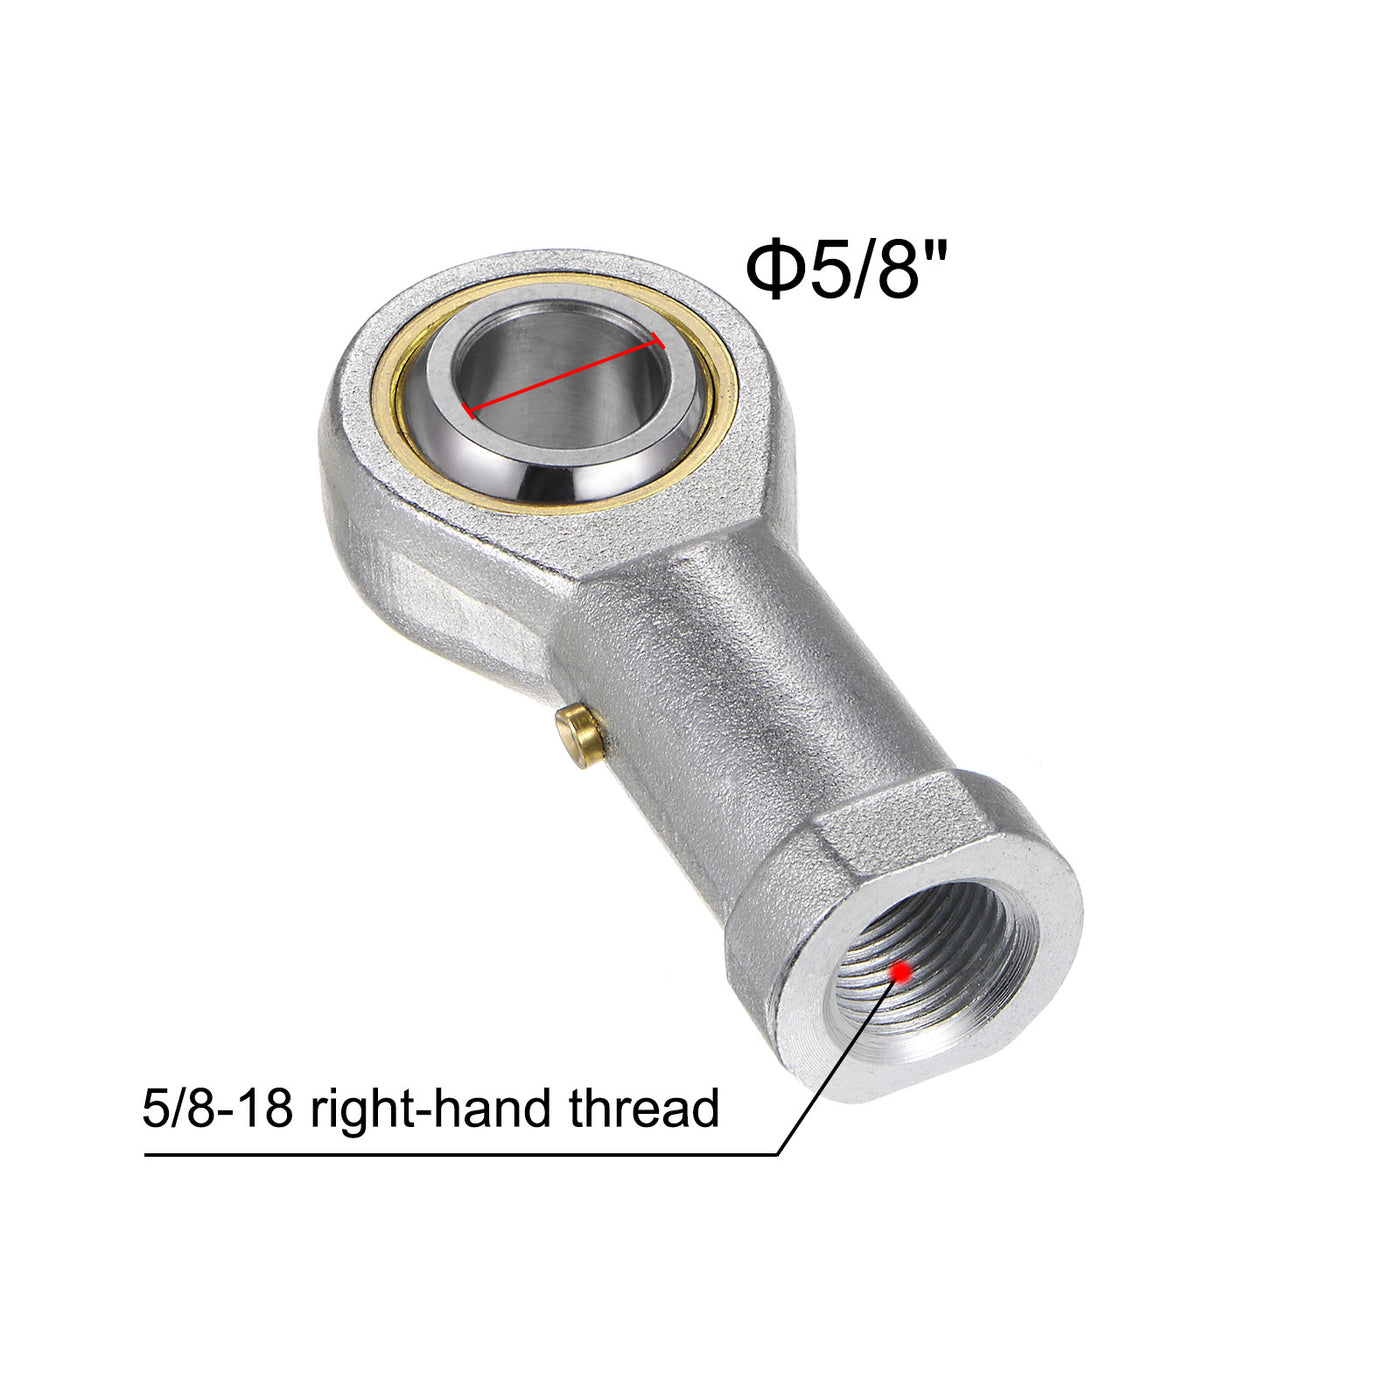 uxcell Uxcell PHSB10 Female Rod End 5/8" Bore and 5/8-18 Right Hand Thread,Includes Jam Nut